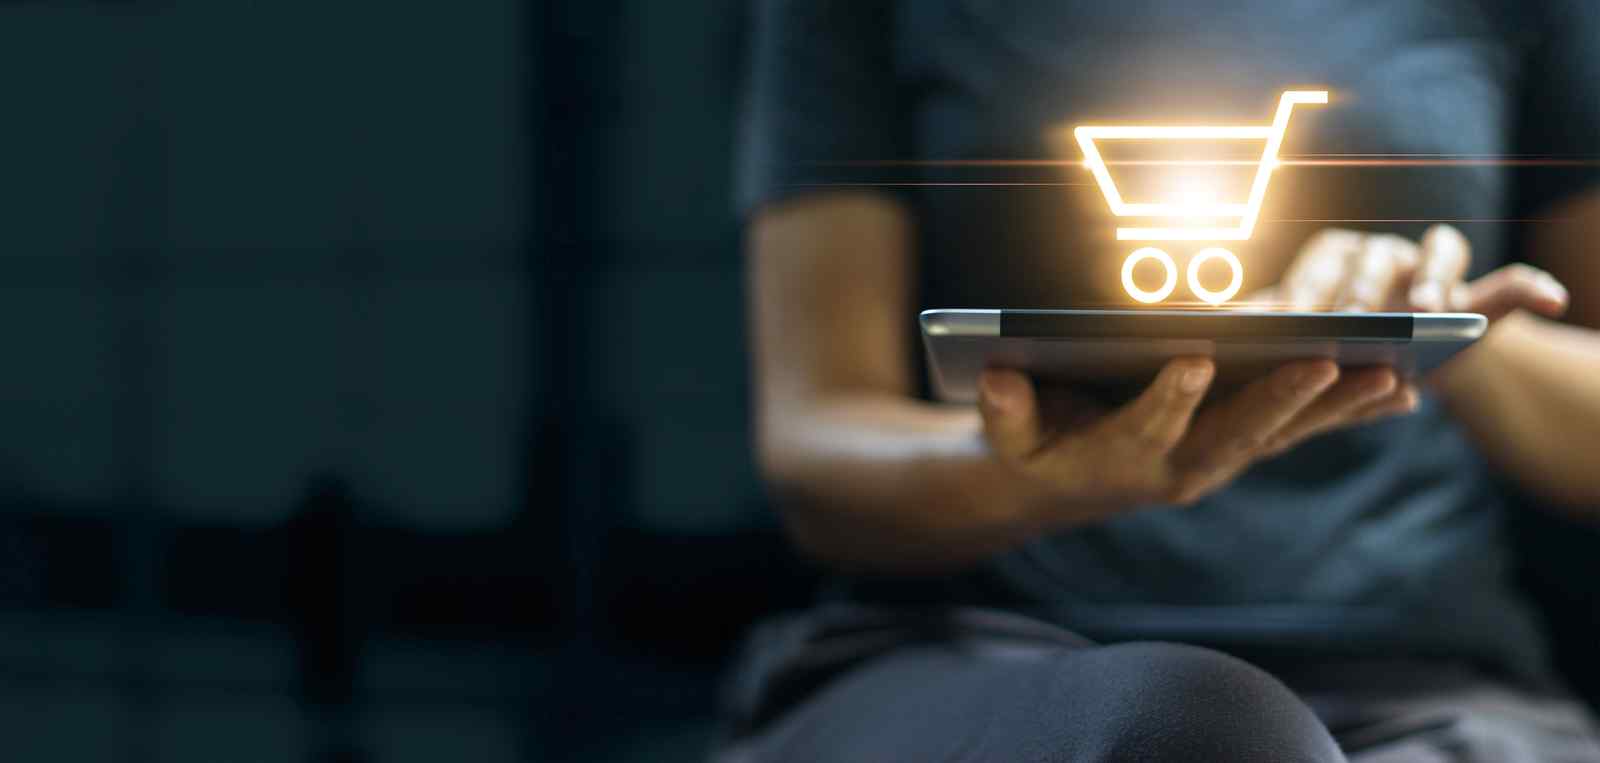 Ecommerce Platforms: Magento - An insider's edition of what you should know